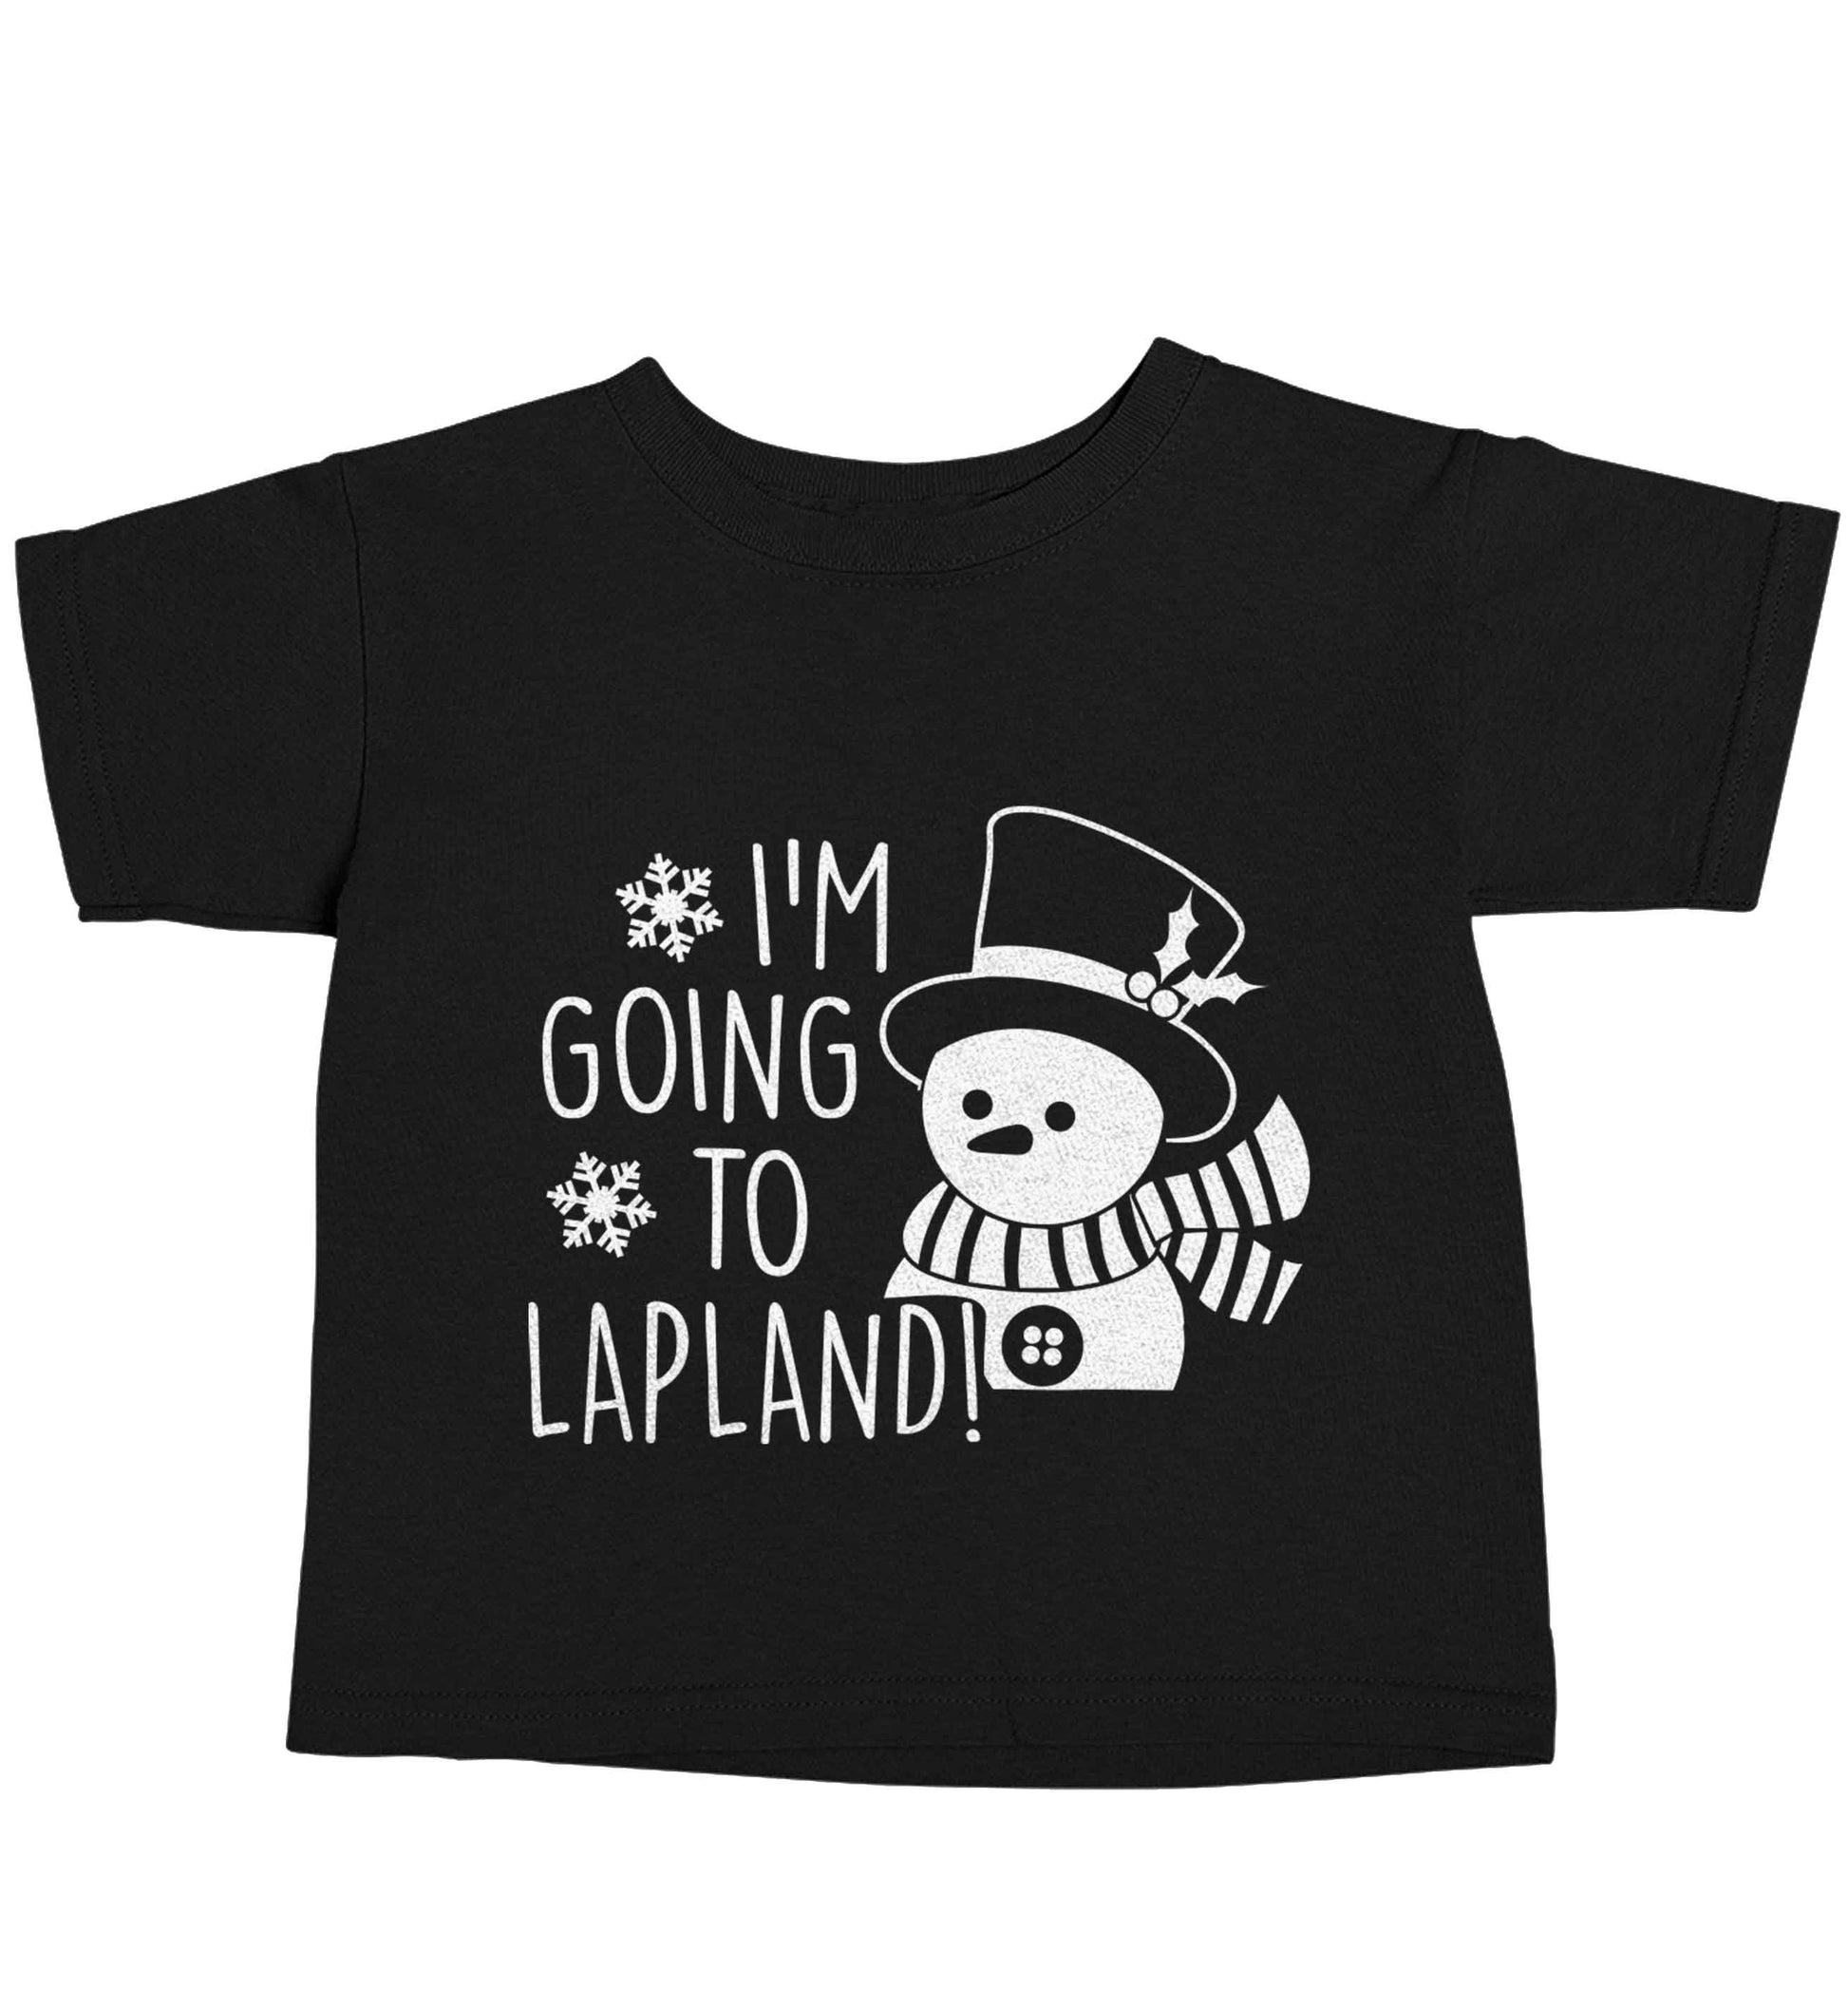 I'm going to Lapland Black baby toddler Tshirt 2 years